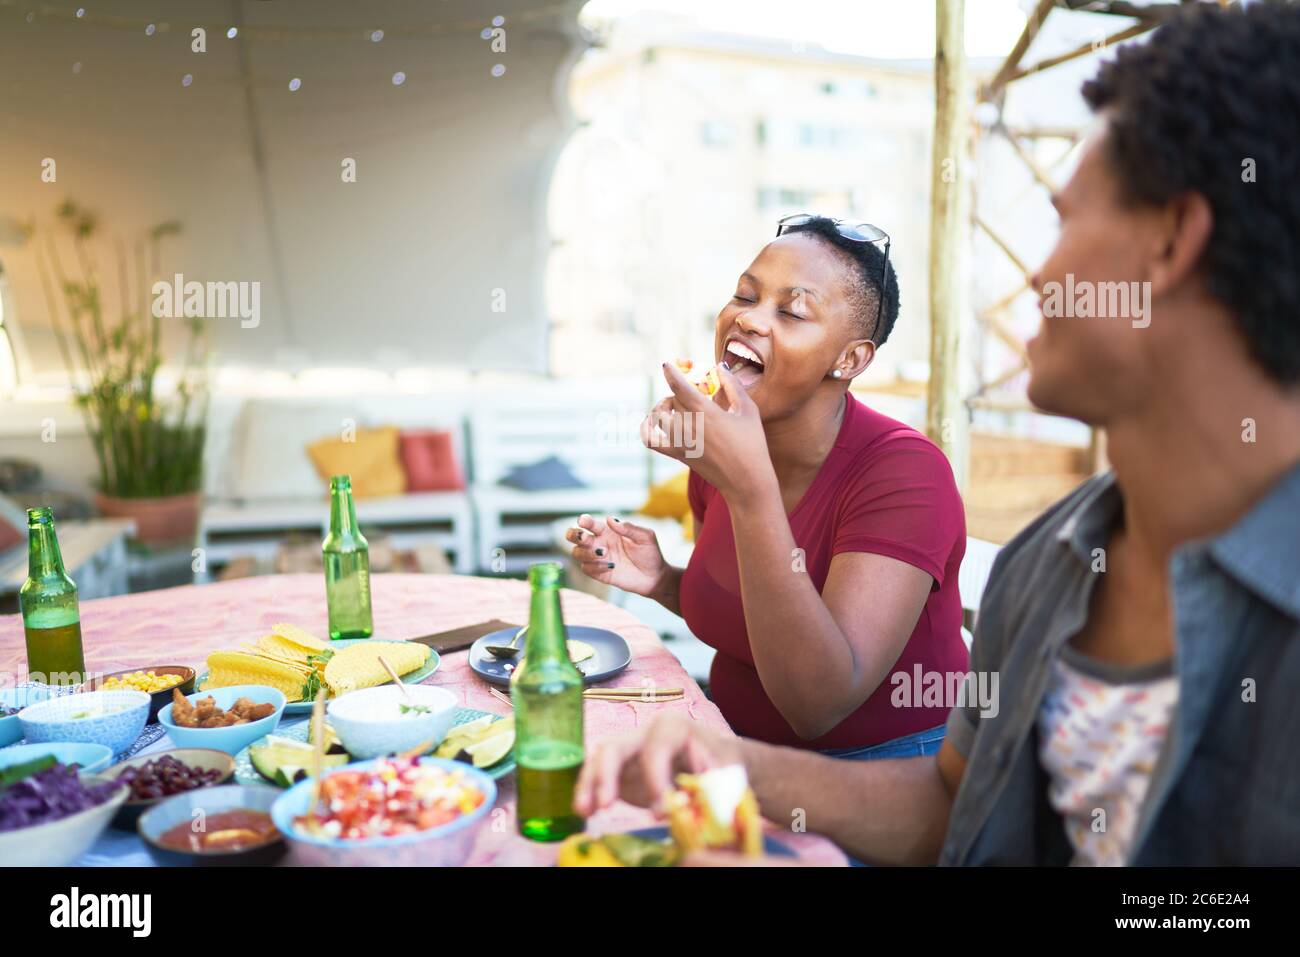 Young woman enjoying taco lunch at patio table Stock Photo